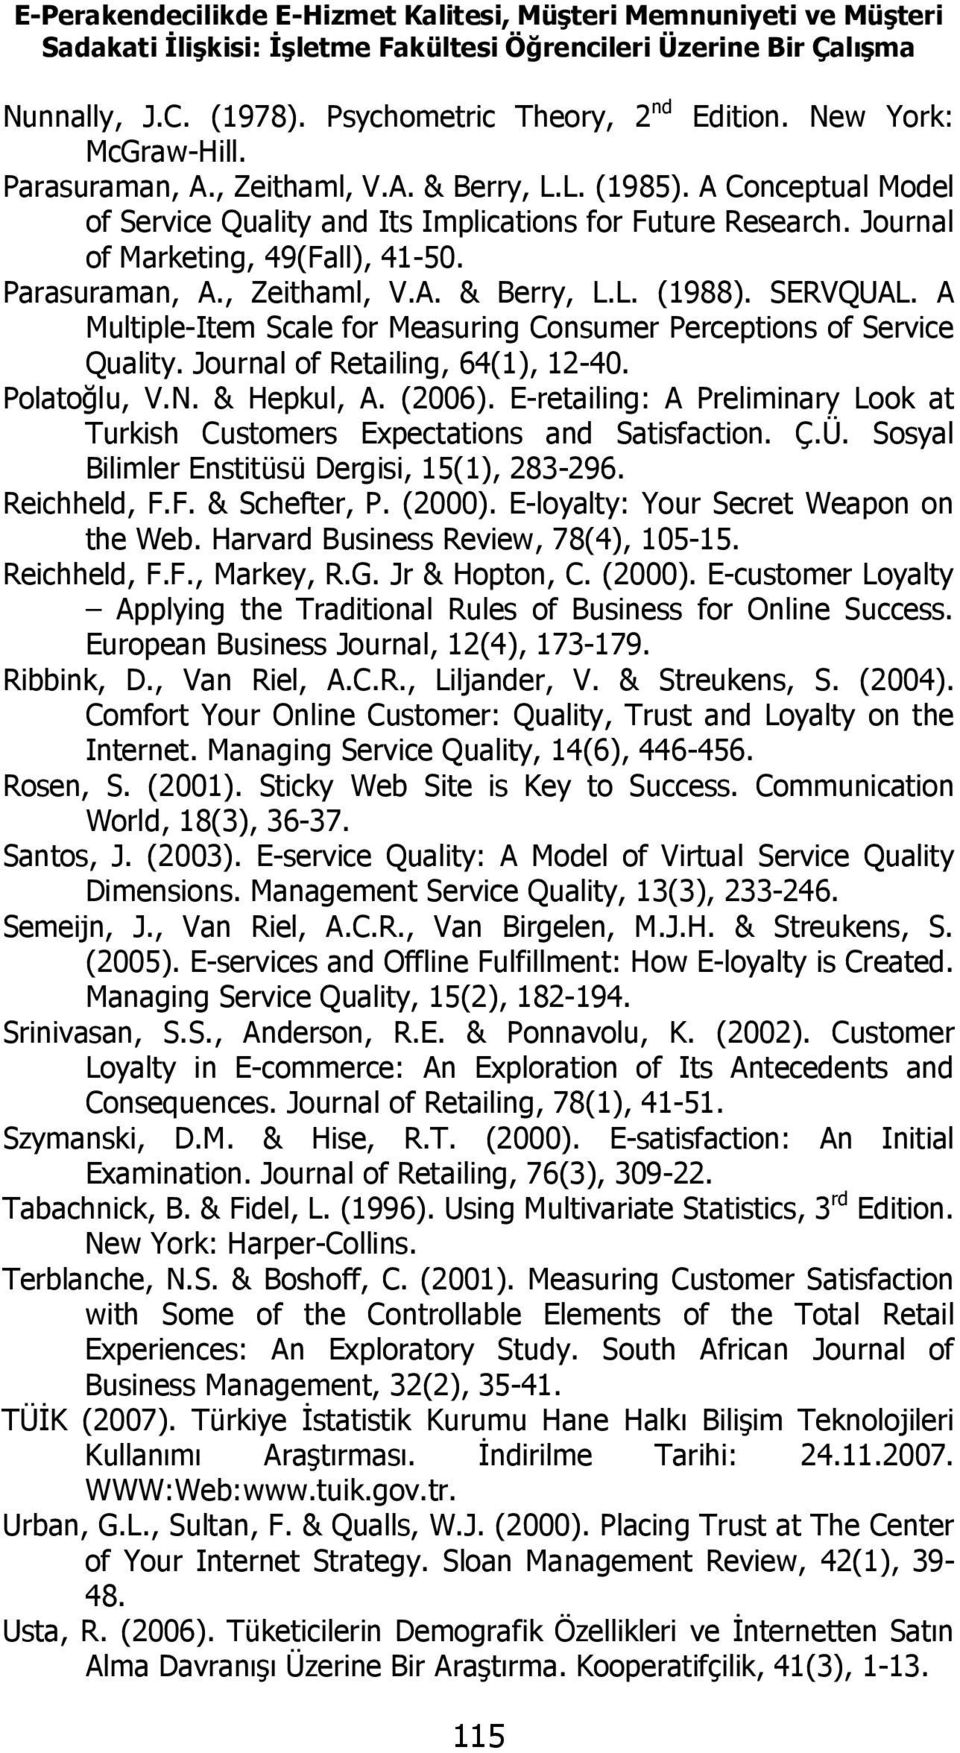 Parasuraman, A., Zeithaml, V.A. & Berry, L.L. (1988). SERVQUAL. A Multiple-Item Scale for Measuring Consumer Perceptions of Service Quality. Journal of Retailing, 64(1), 12-40. Polatoğlu, V.N.